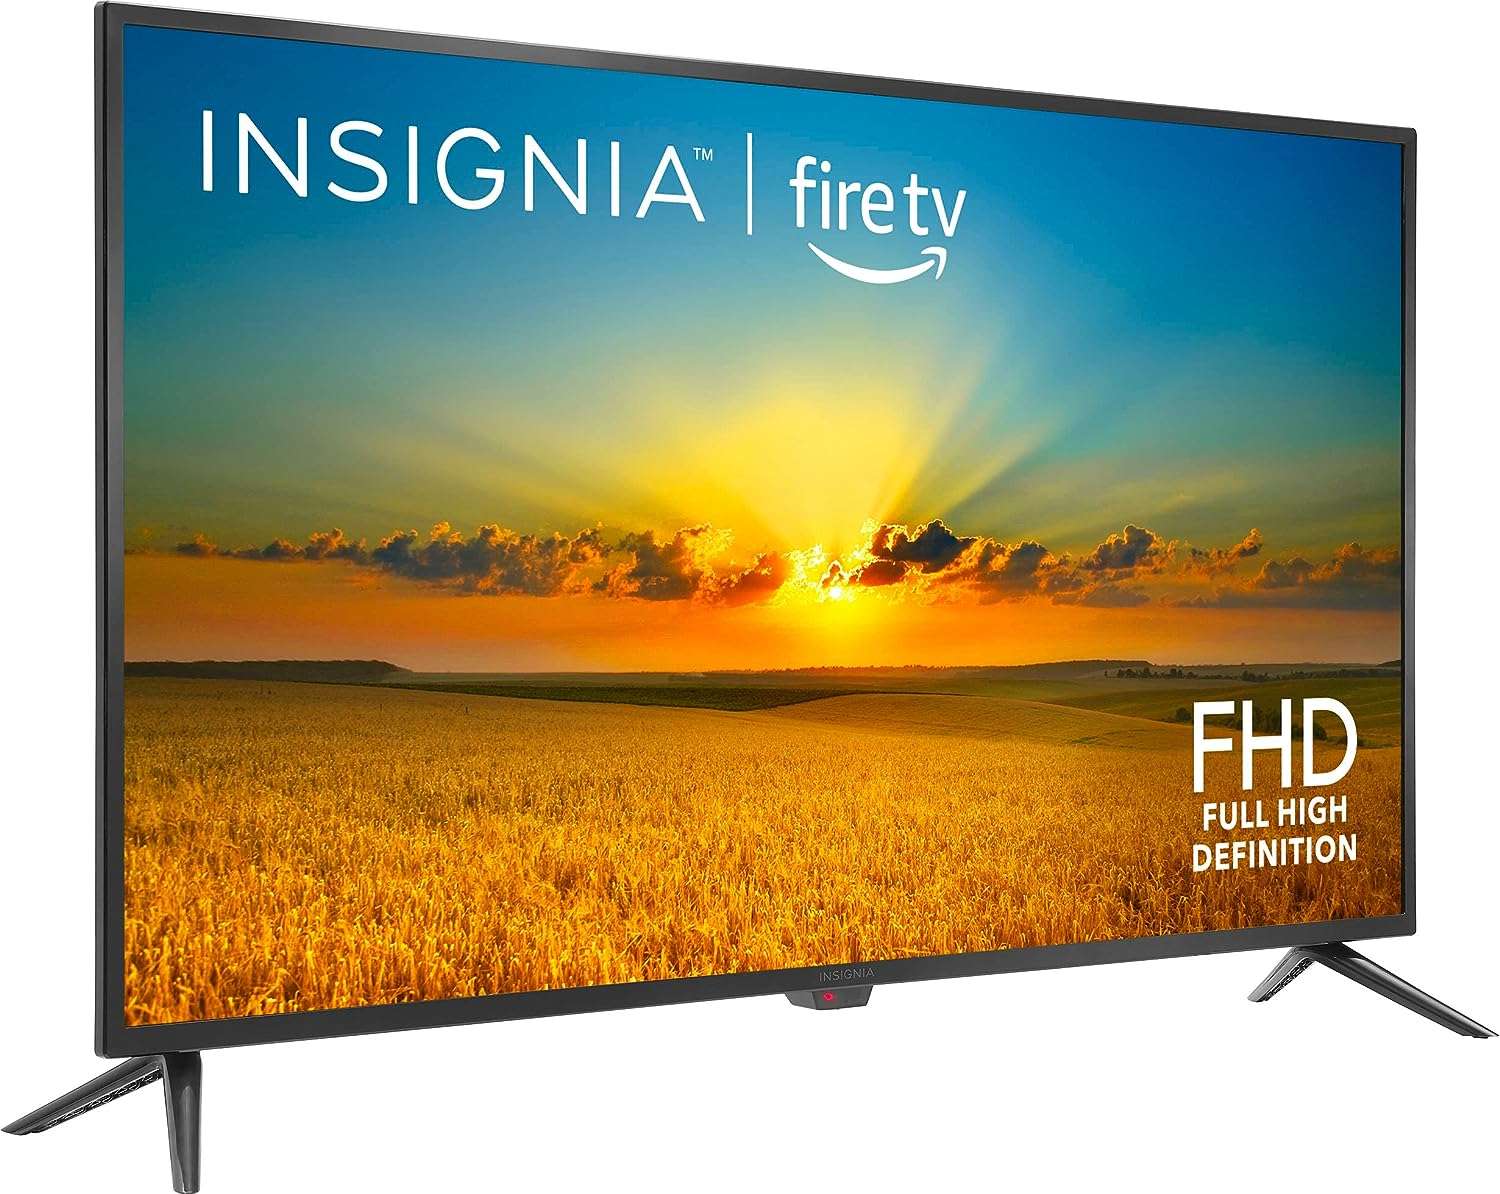 Upgrade Your Entertainment Experience with the INSIGNIA 42-inch Class F20 Series Smart Full HD Fire TV!